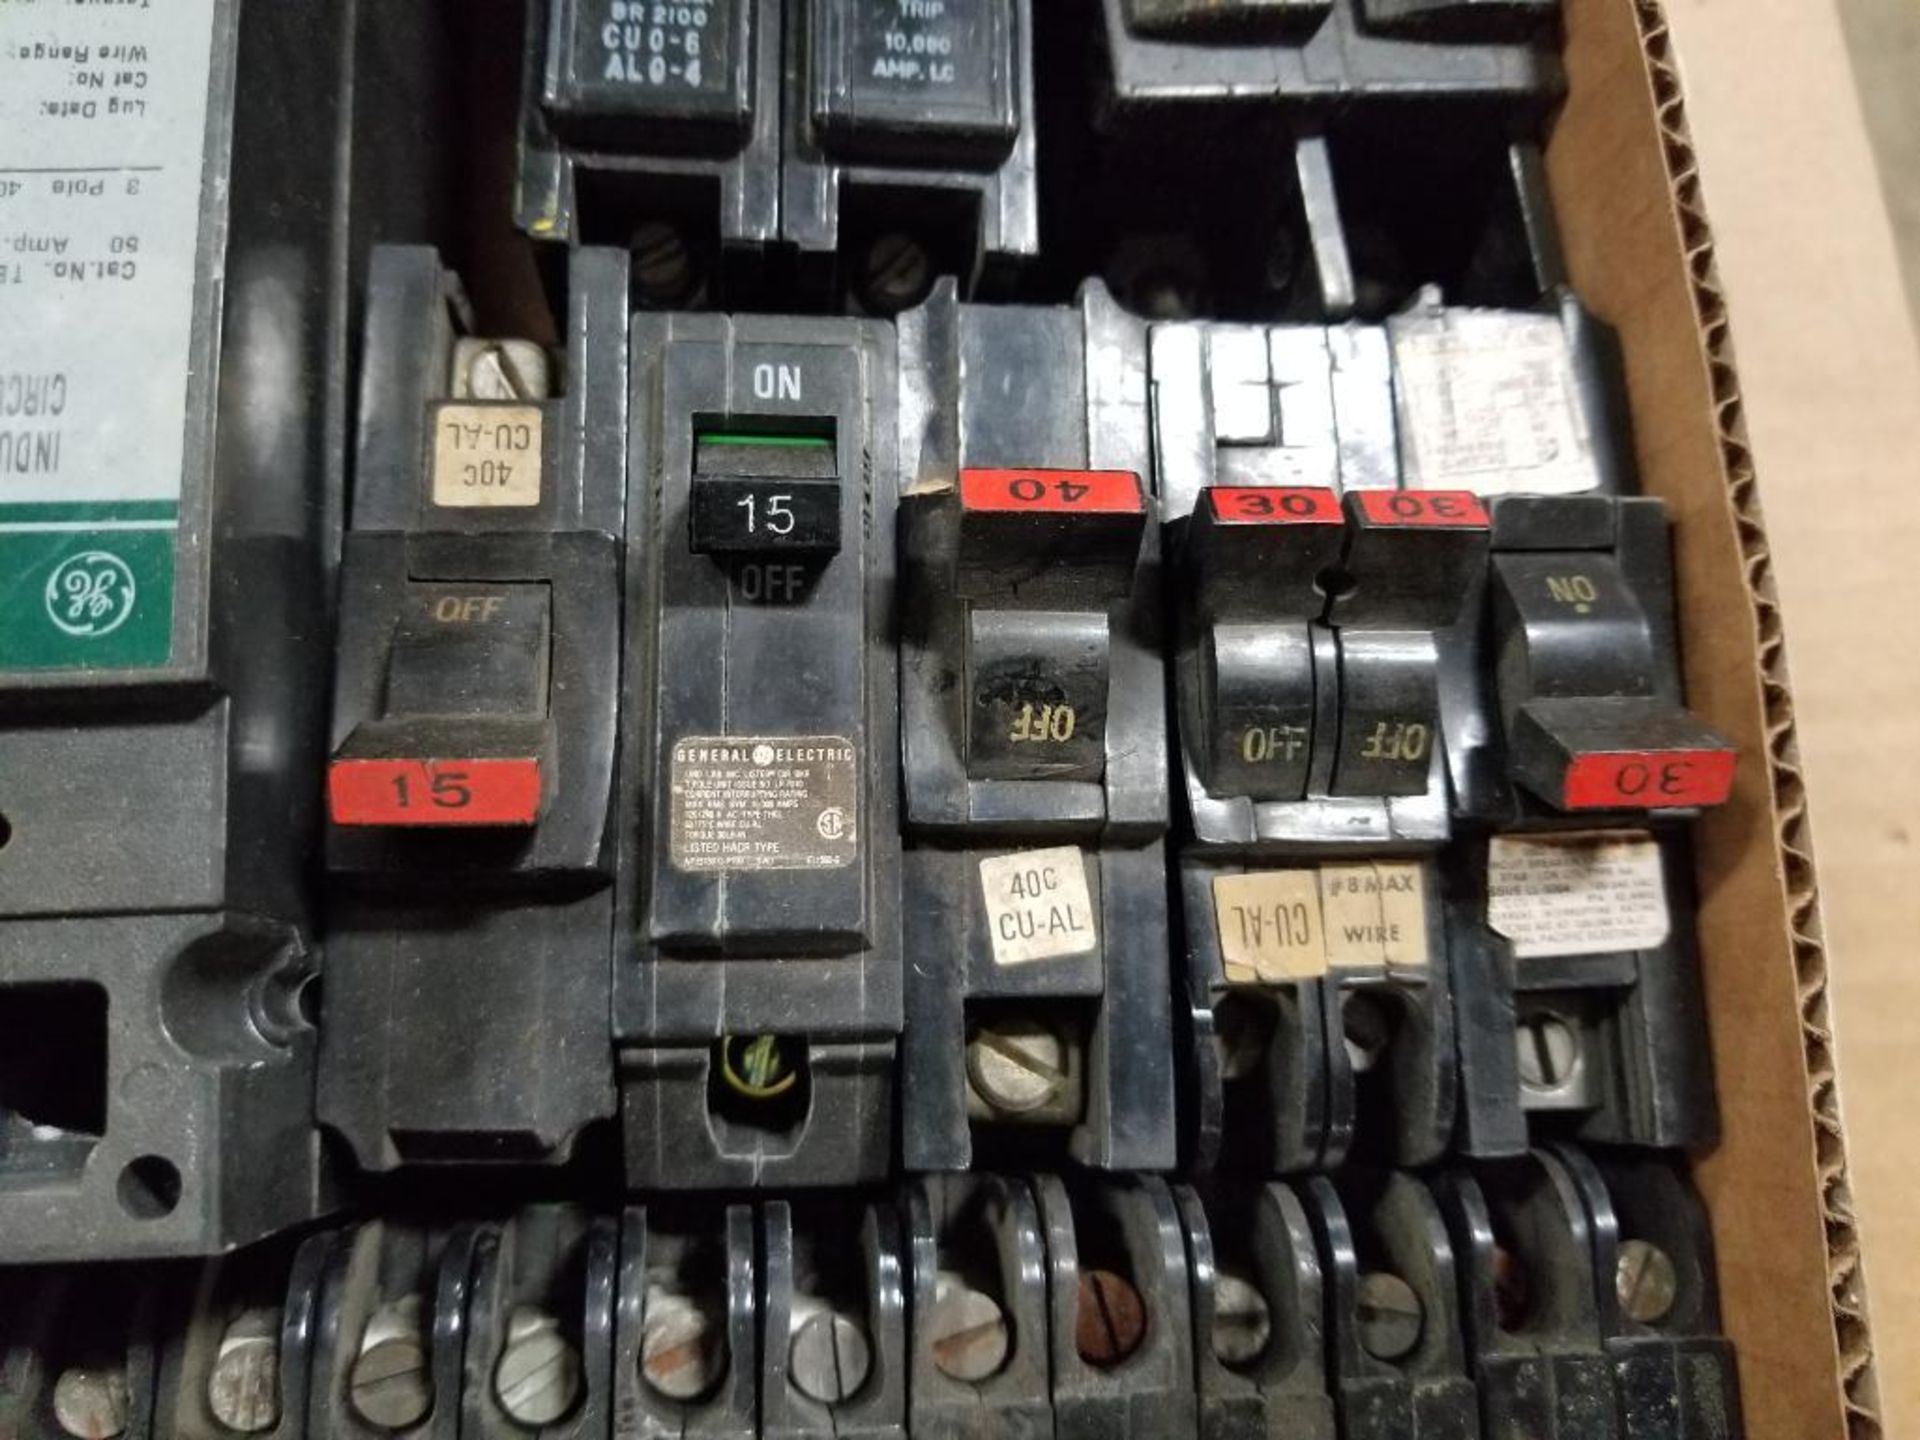 Assorted electrical breakers. Square-D, GE, Stab-lok. - Image 8 of 12